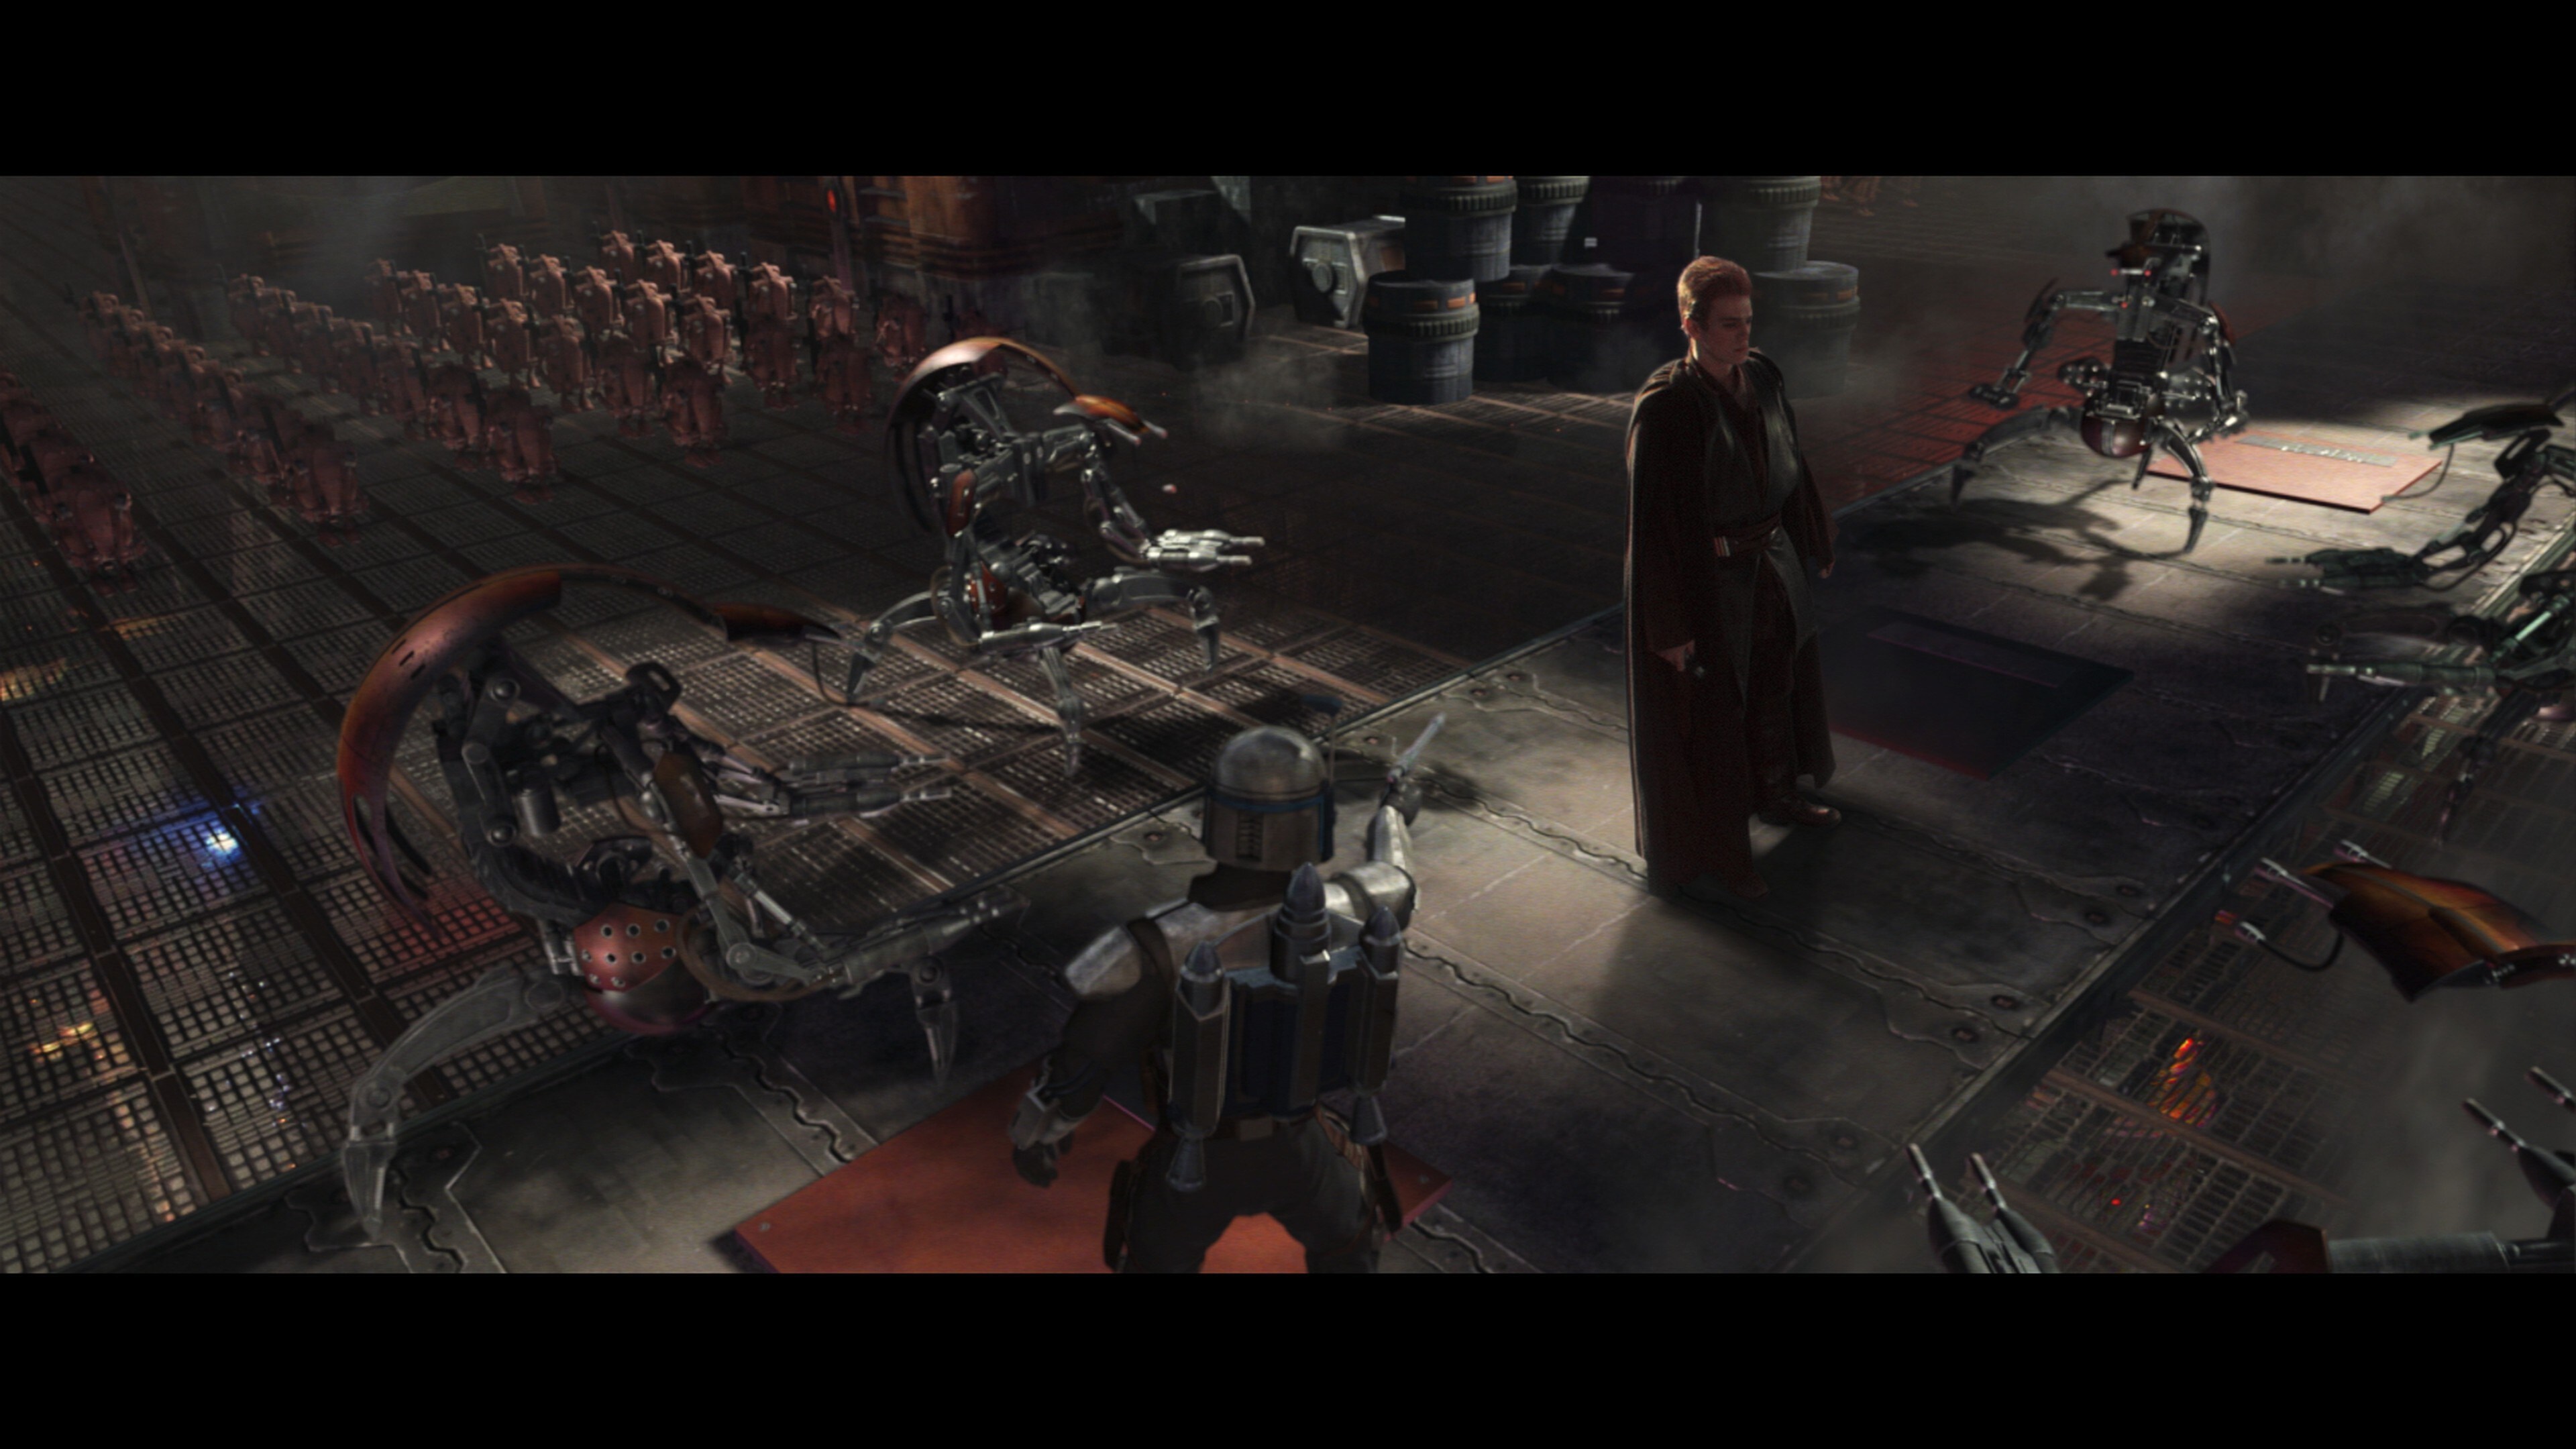 Obi-Wan wasn’t dead, though Separatist destroyer droids quickly captured him. But Jango had a new...